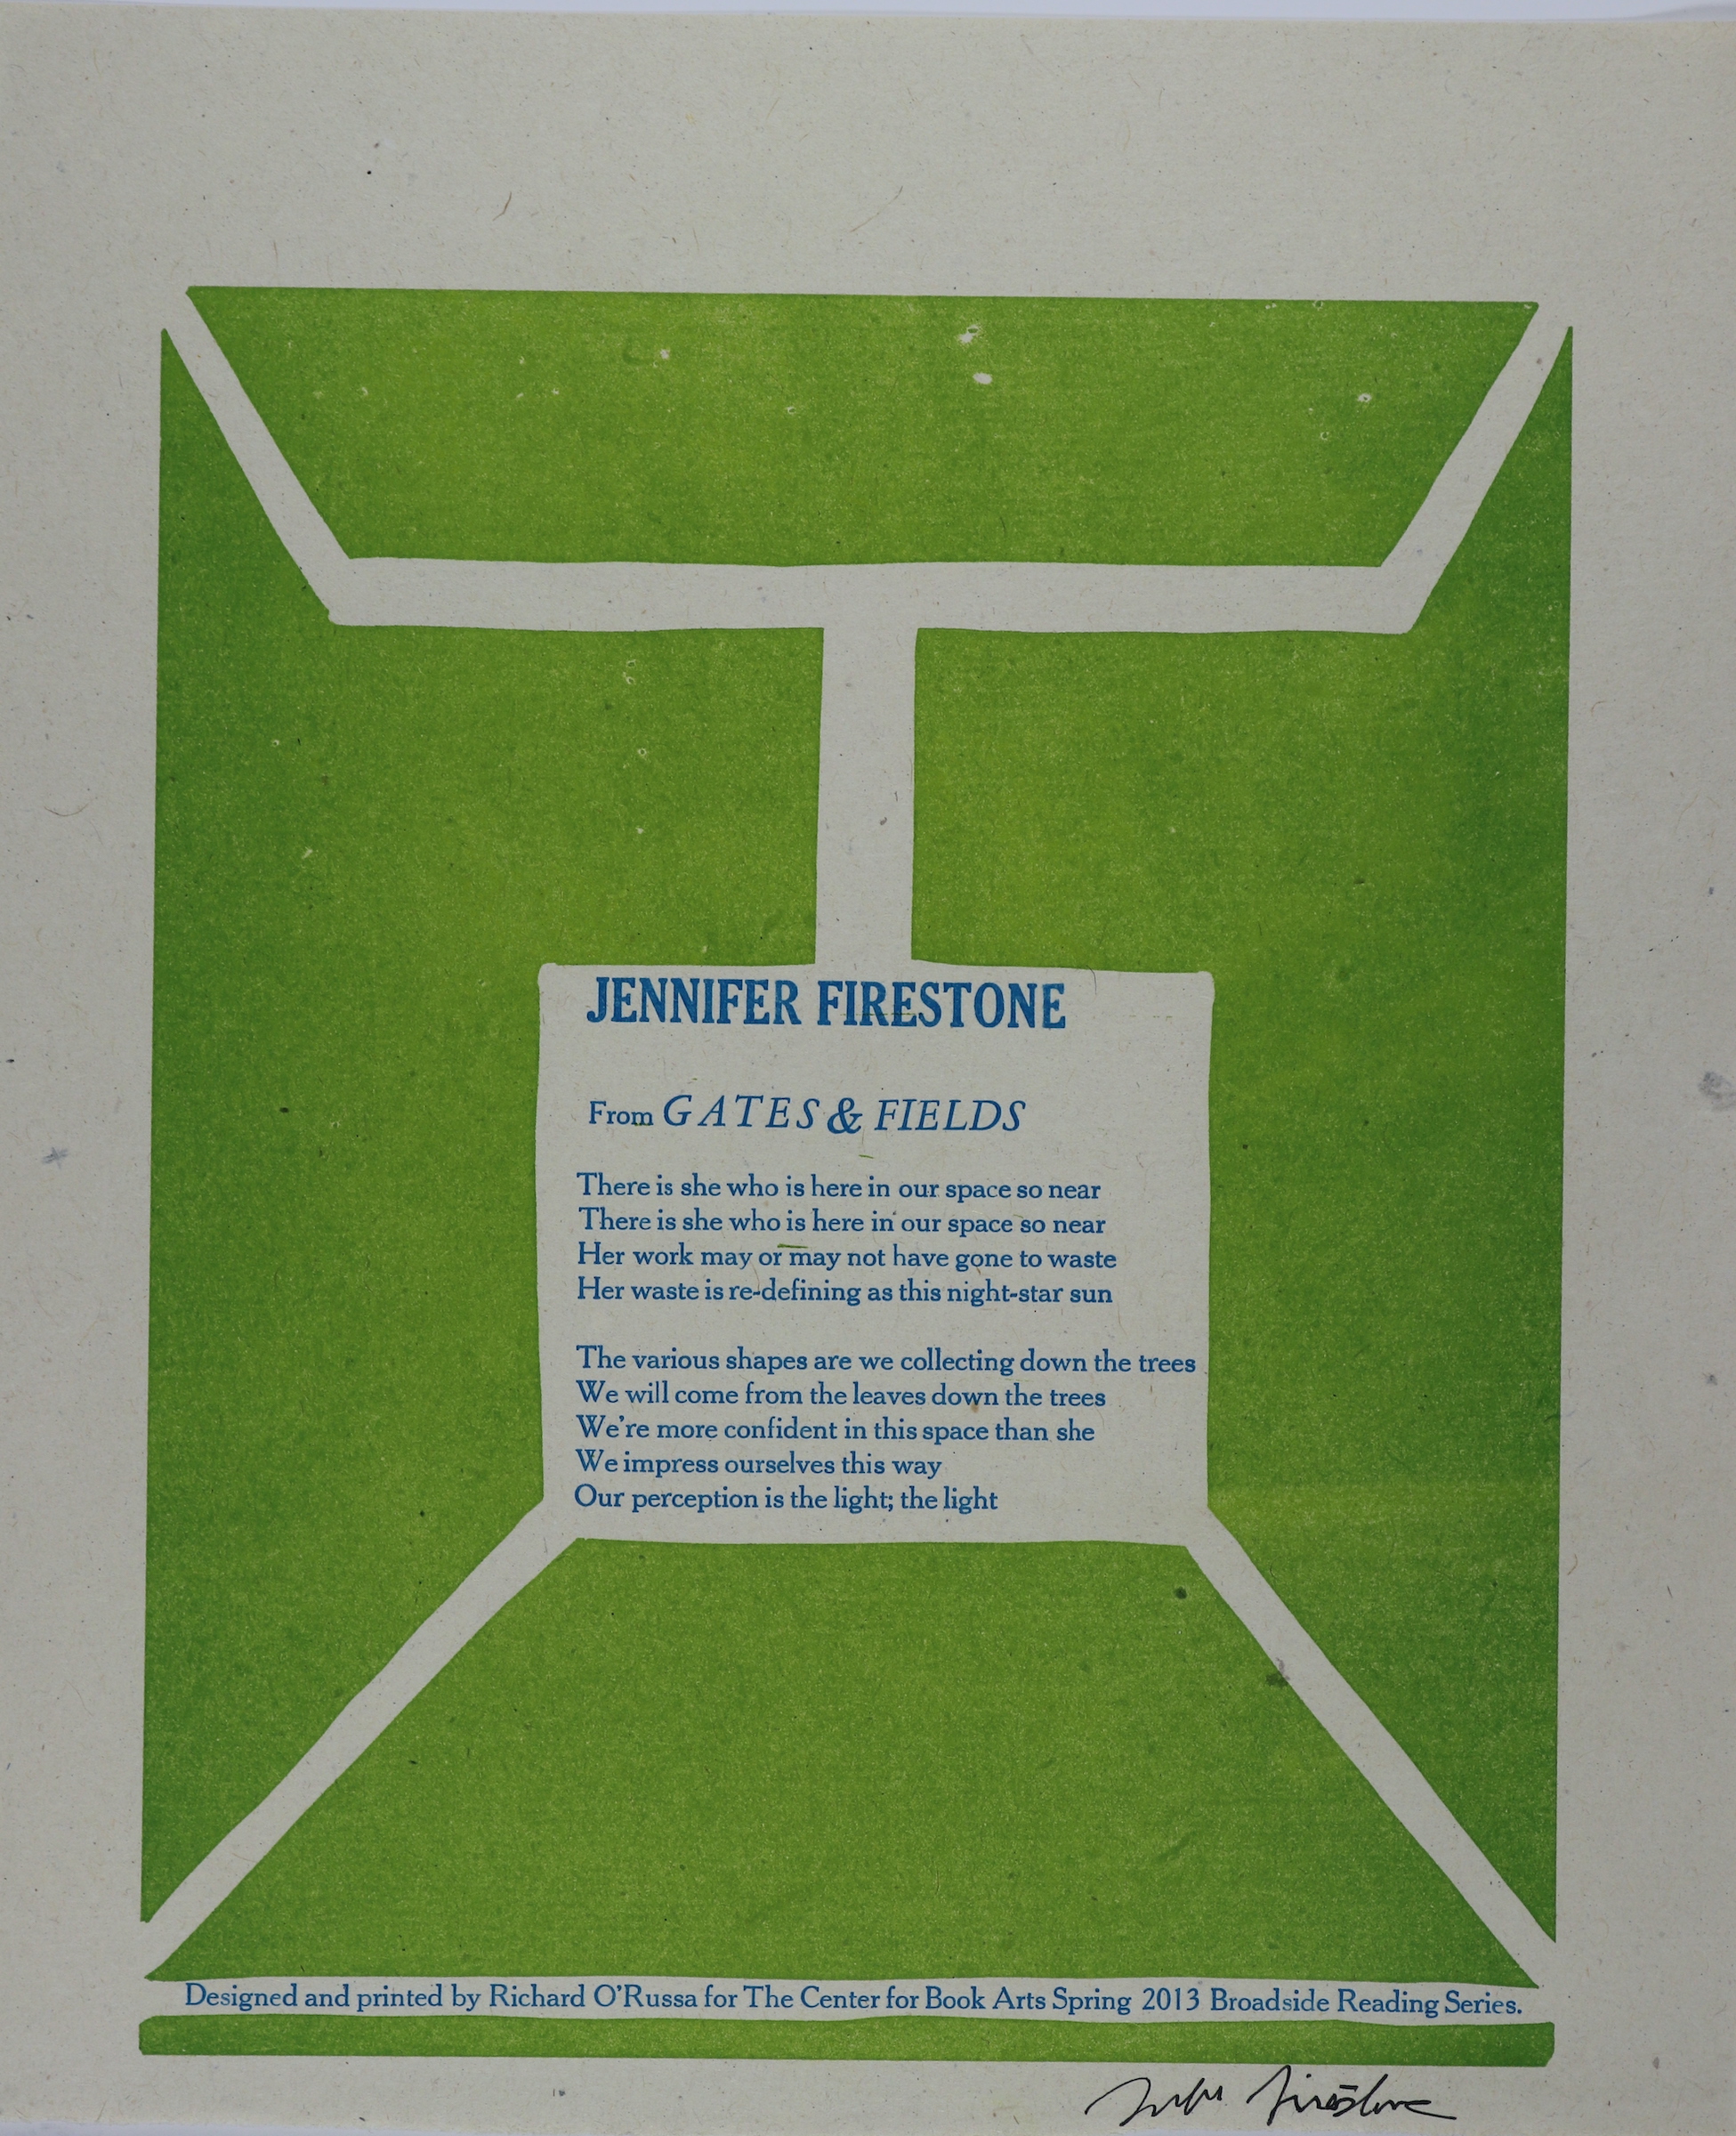 This broadside is long and rectangular in size, with a white background and slightly smaller, square design that is green in color, holding the title, text, and author’s name. The green square design also has a white line design on it, like a stick person with their arms and legs stretched out to the corners of the green box, but without a head. The text, title, and author’s name is inside another white box inside the green square, with the author’s name in bold, large, blue letters. Below that is the title, also in blue and capitalized, but still smaller than the author’s name. The text is smaller than both the title and author’s name, and is in blue, formatted into two paragraphs total.